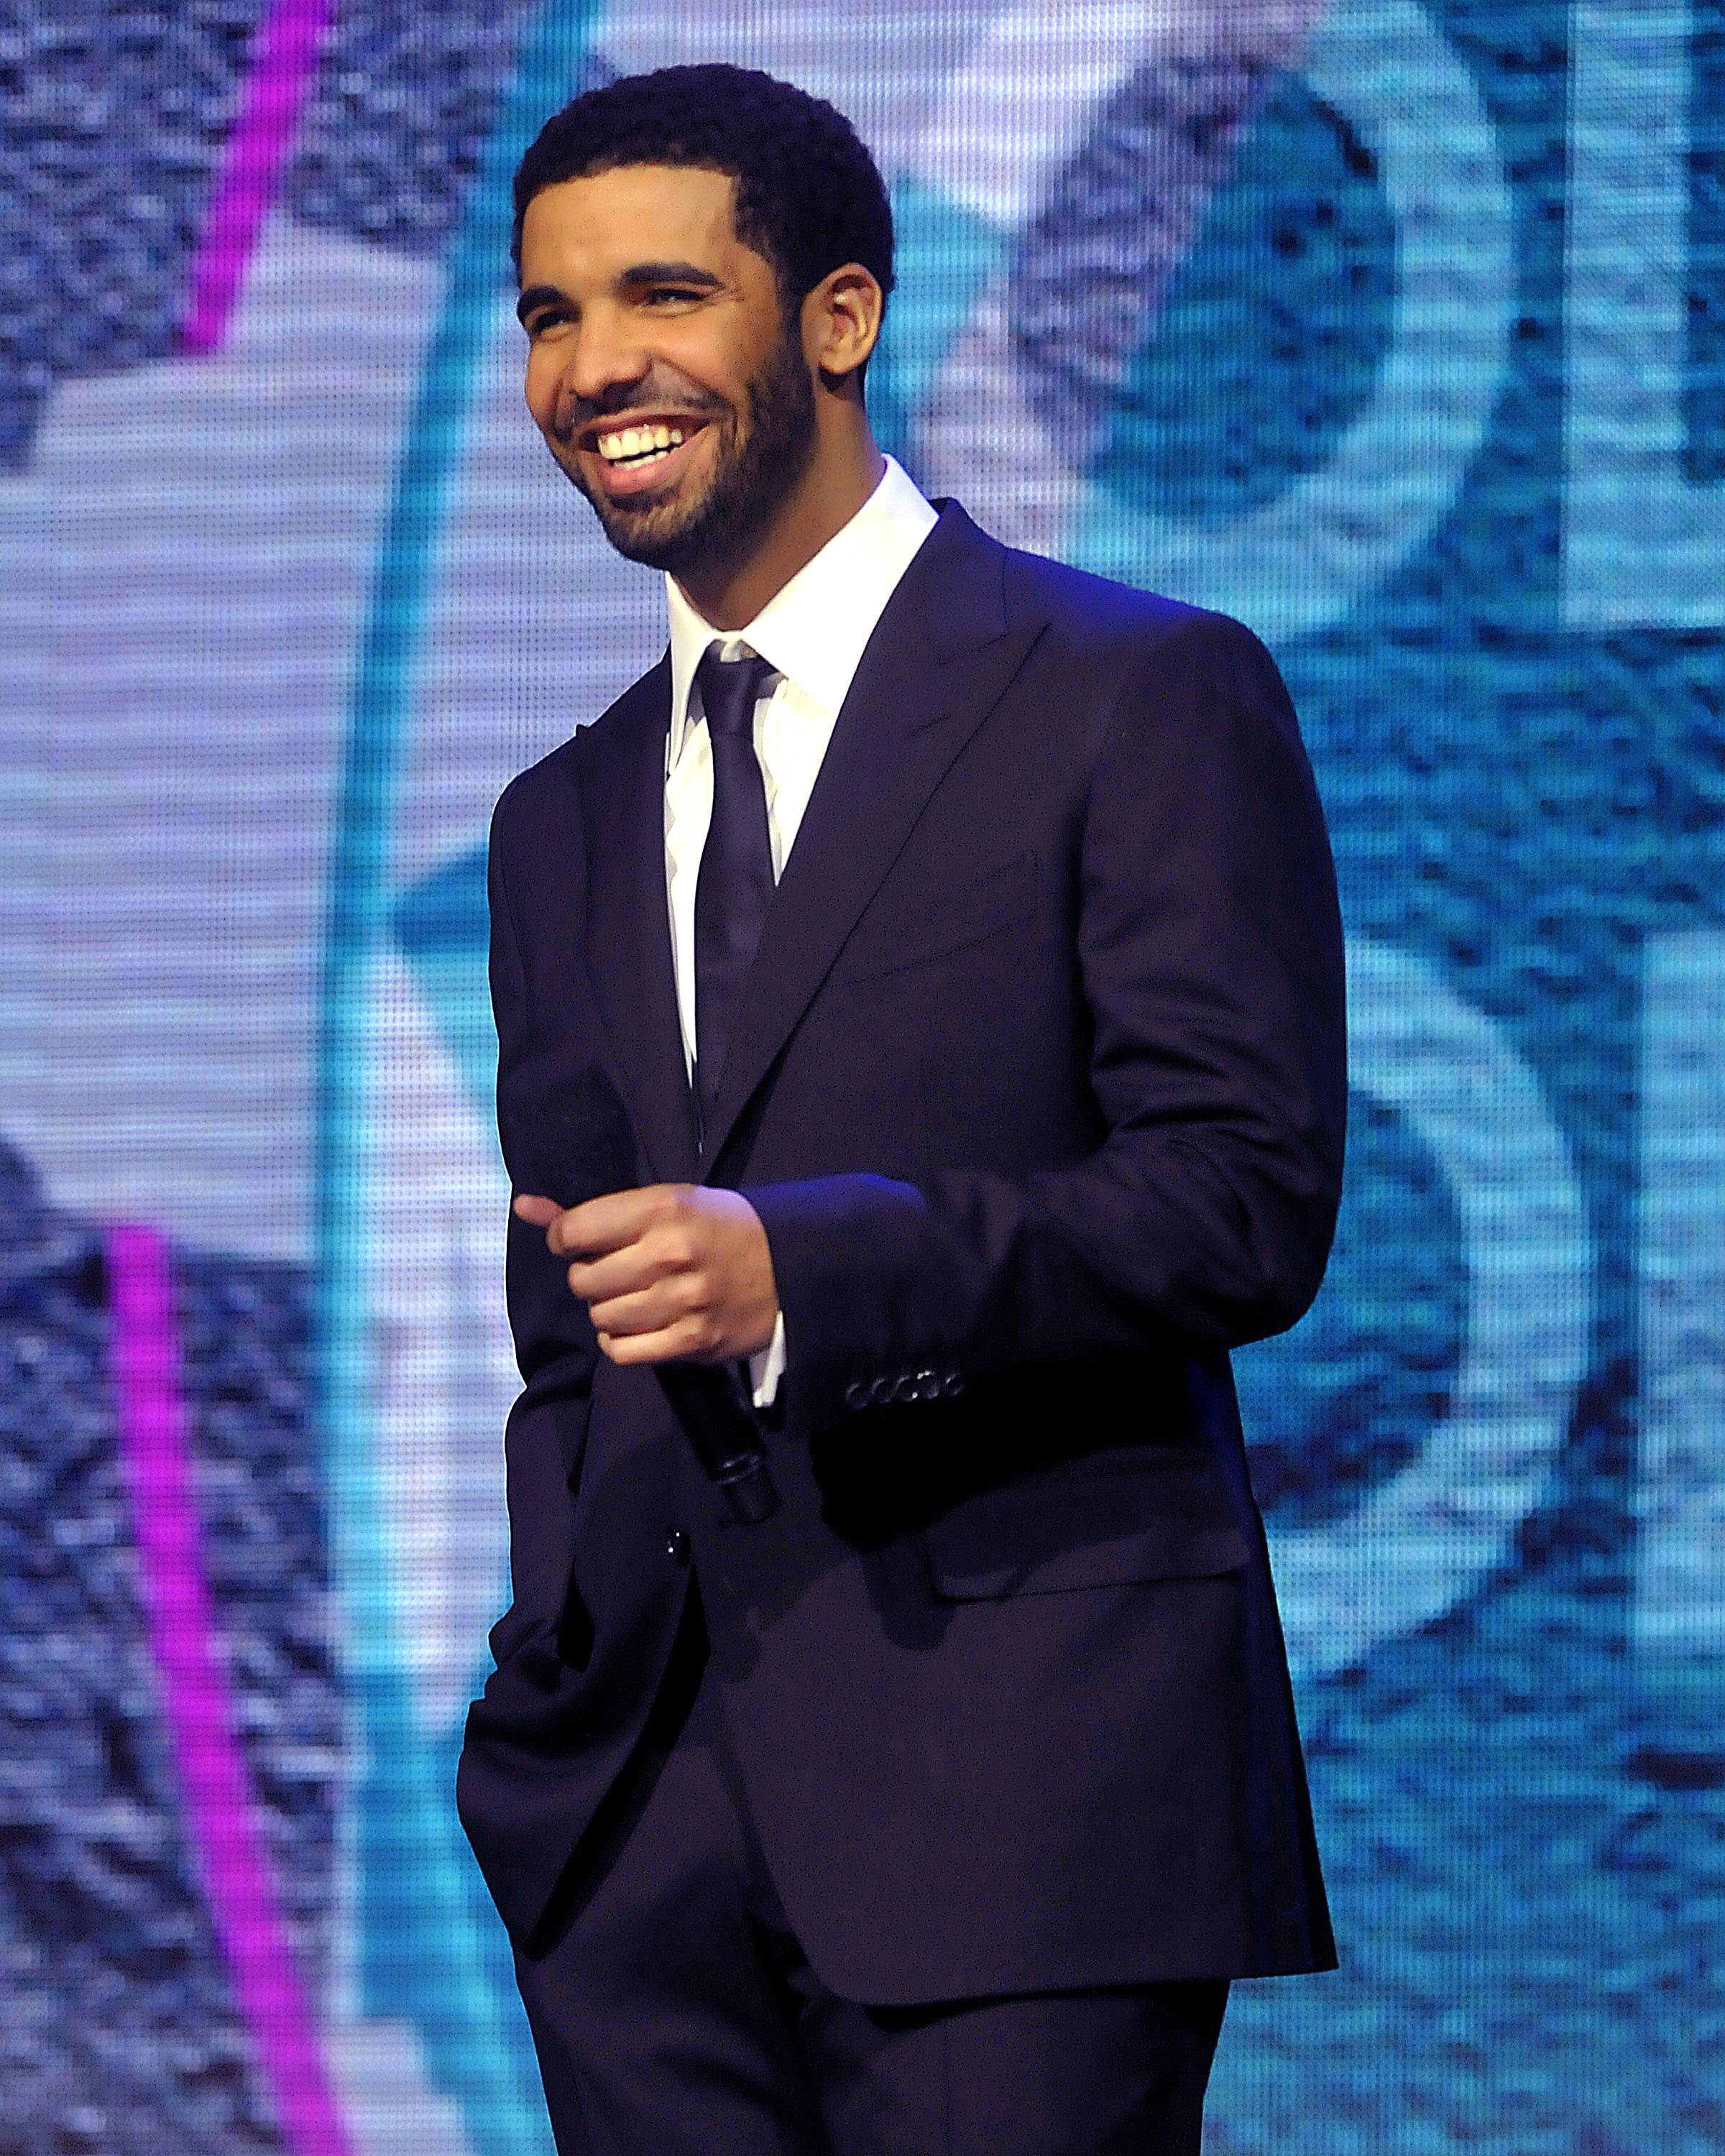 Drake: October 24 - The rapper and actor turns 25. (Photo: Jag Gundu/Getty Images)